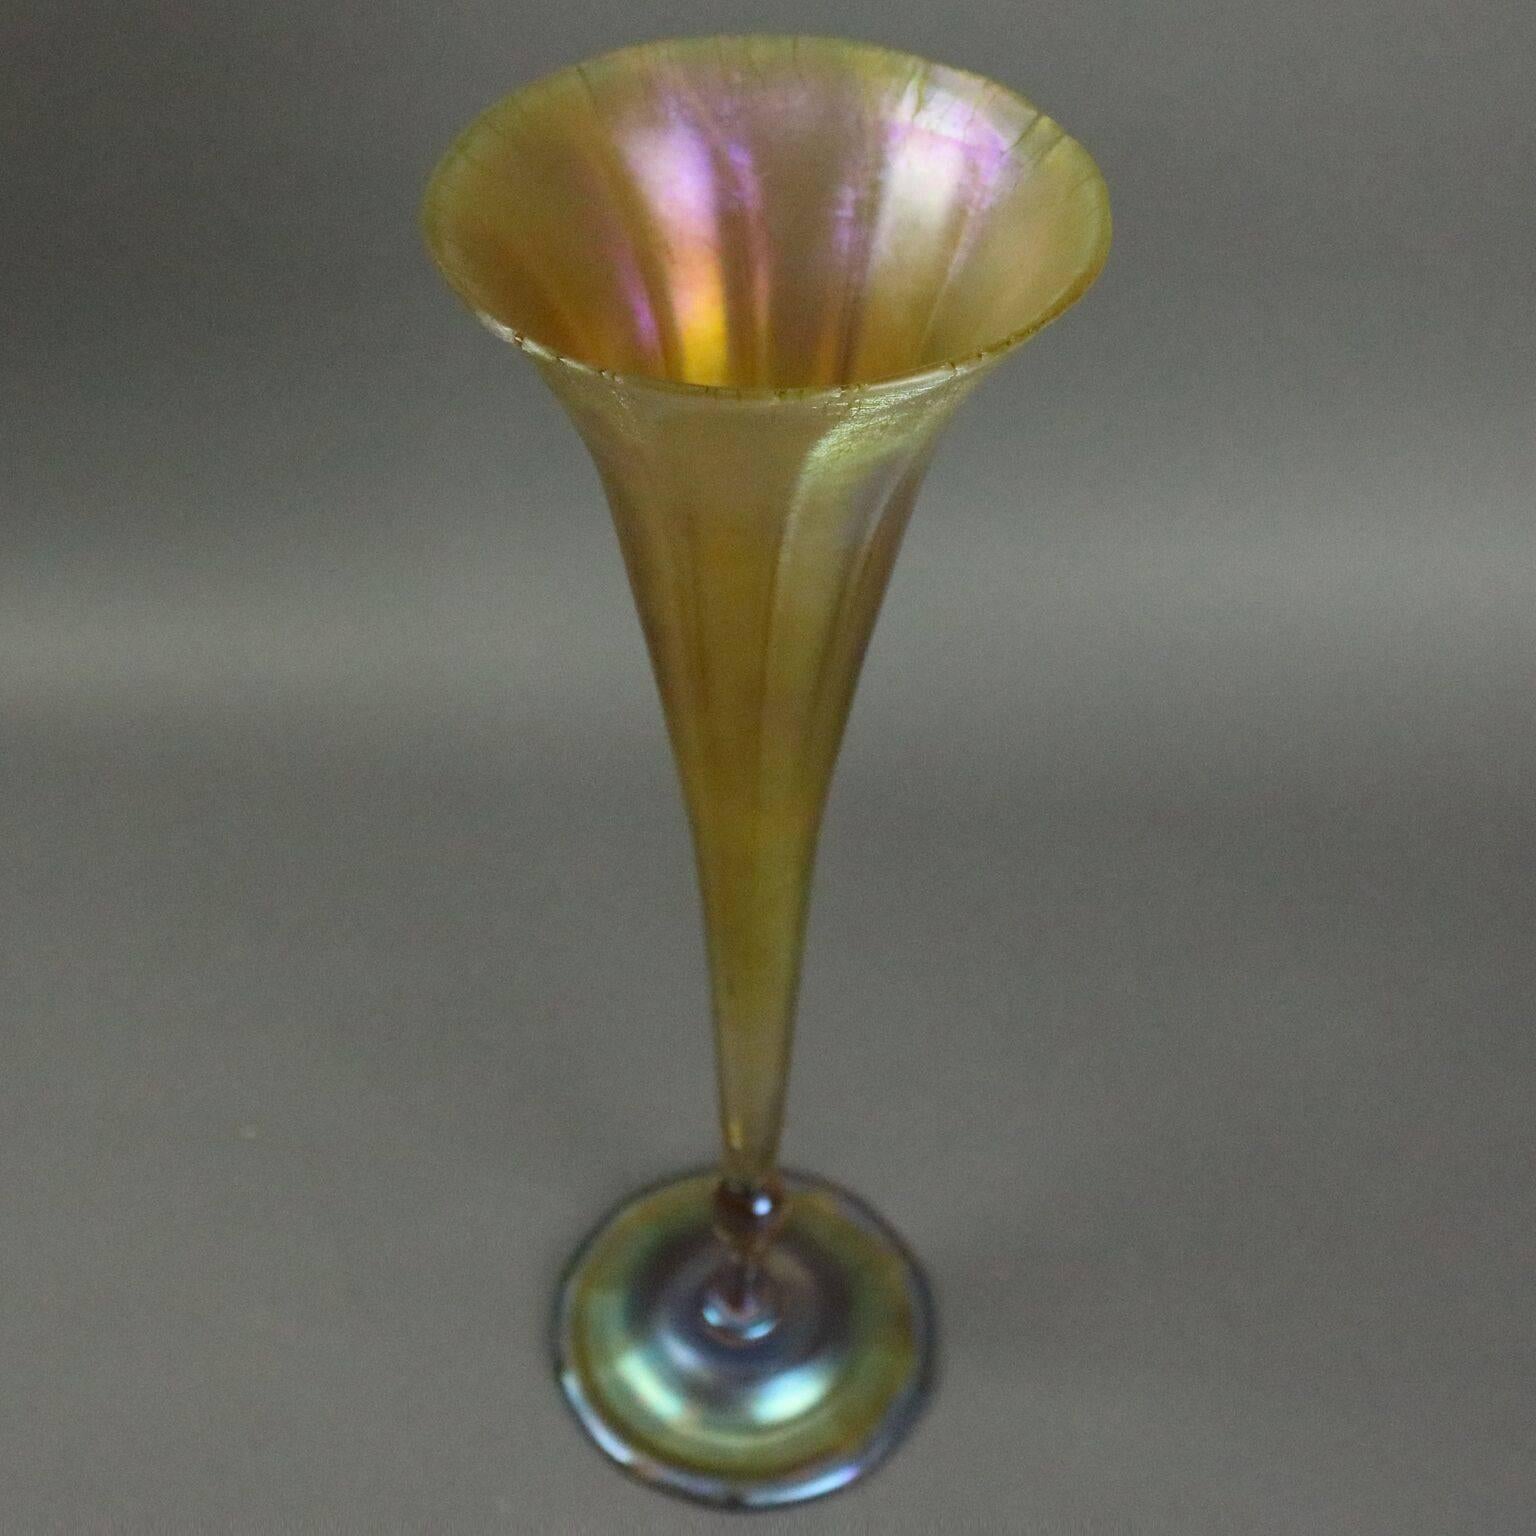 Antique Tiffany Favrille art glass trumpet vase features classic gold trumpet on irridized blue base, signed "L. C. Tiffany Favrille 1900" on base.

Measures - 15" H x 5.25" diam.